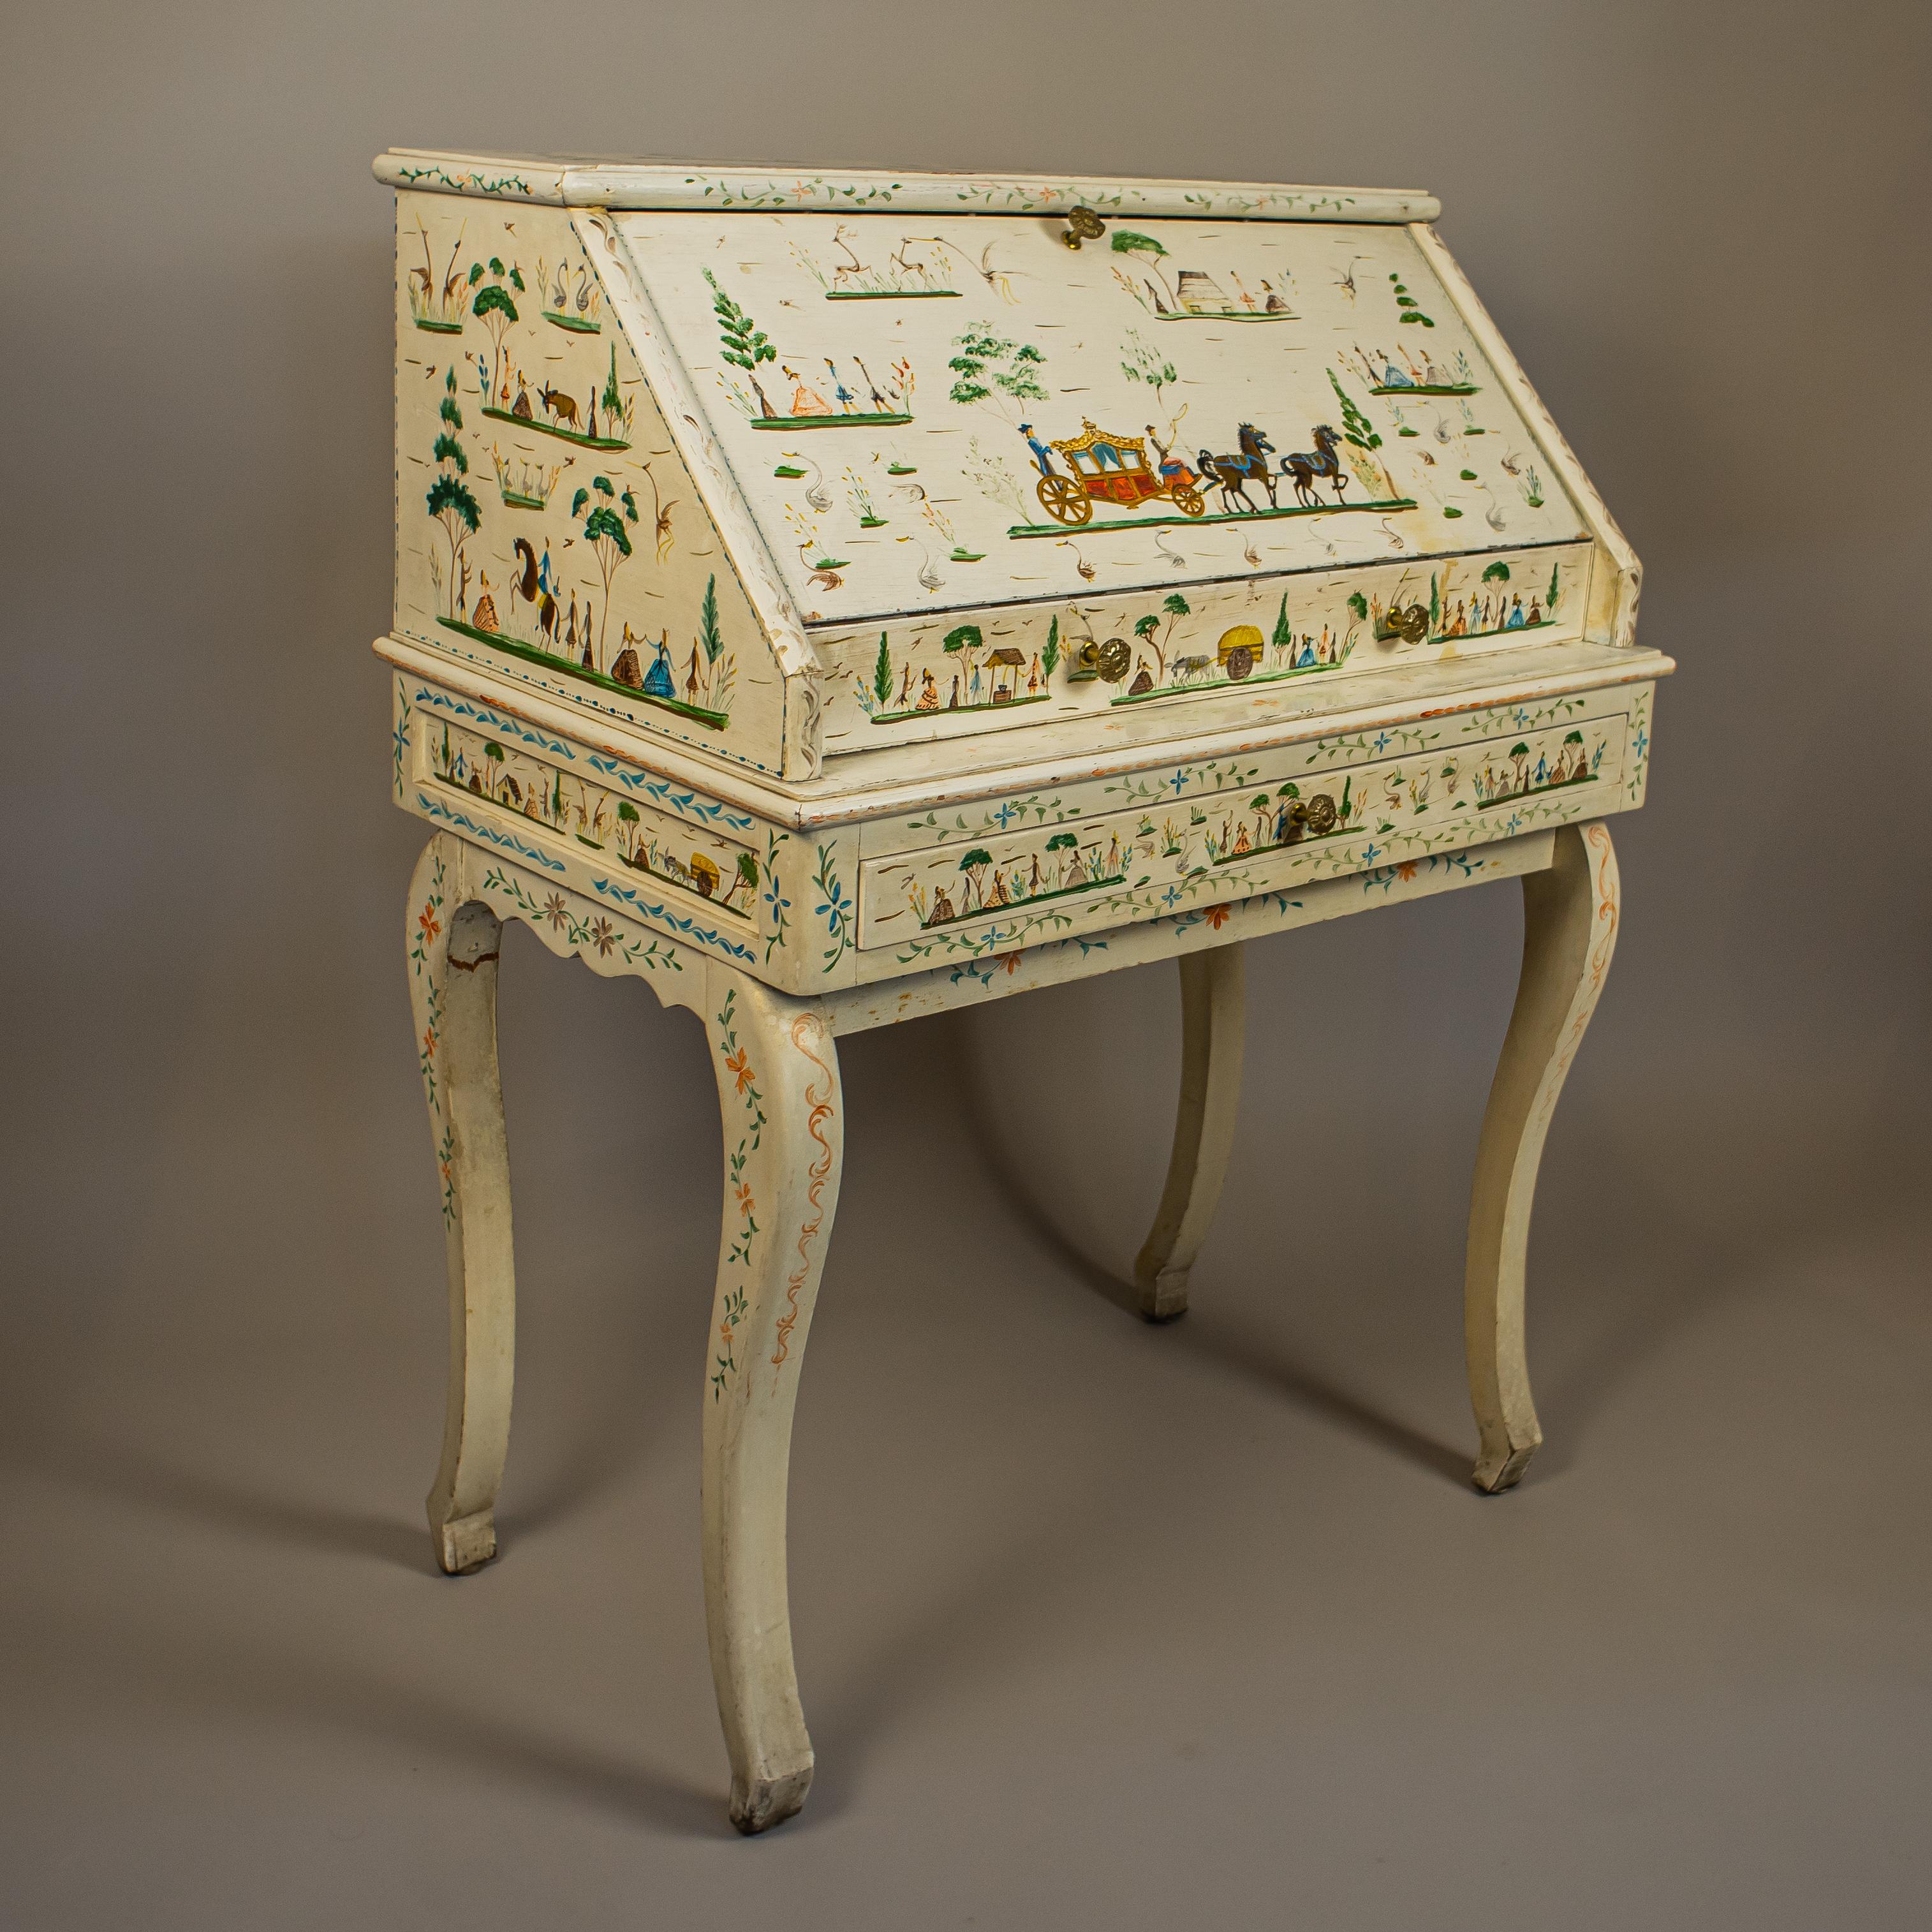 Mid-Century Modern Mexican Folk Art Benito Fosado Hand-Painted Secretaire with Chair and Tray